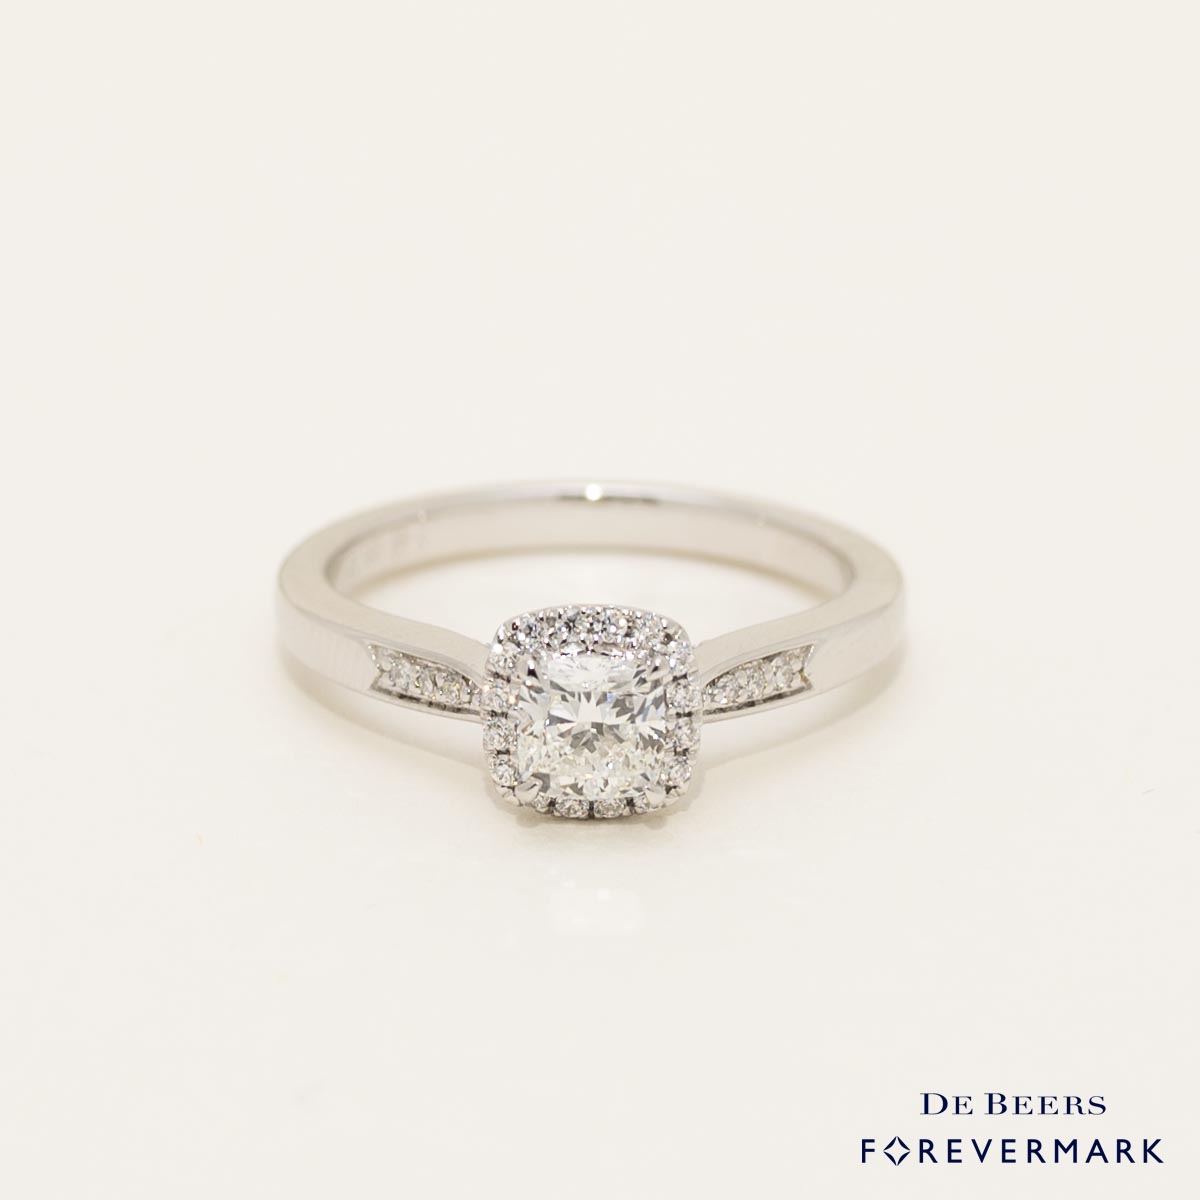 De Beers Forevermark Cushion Diamond Halo Engagement Ring in 14kt White Gold (3/4ct tw)